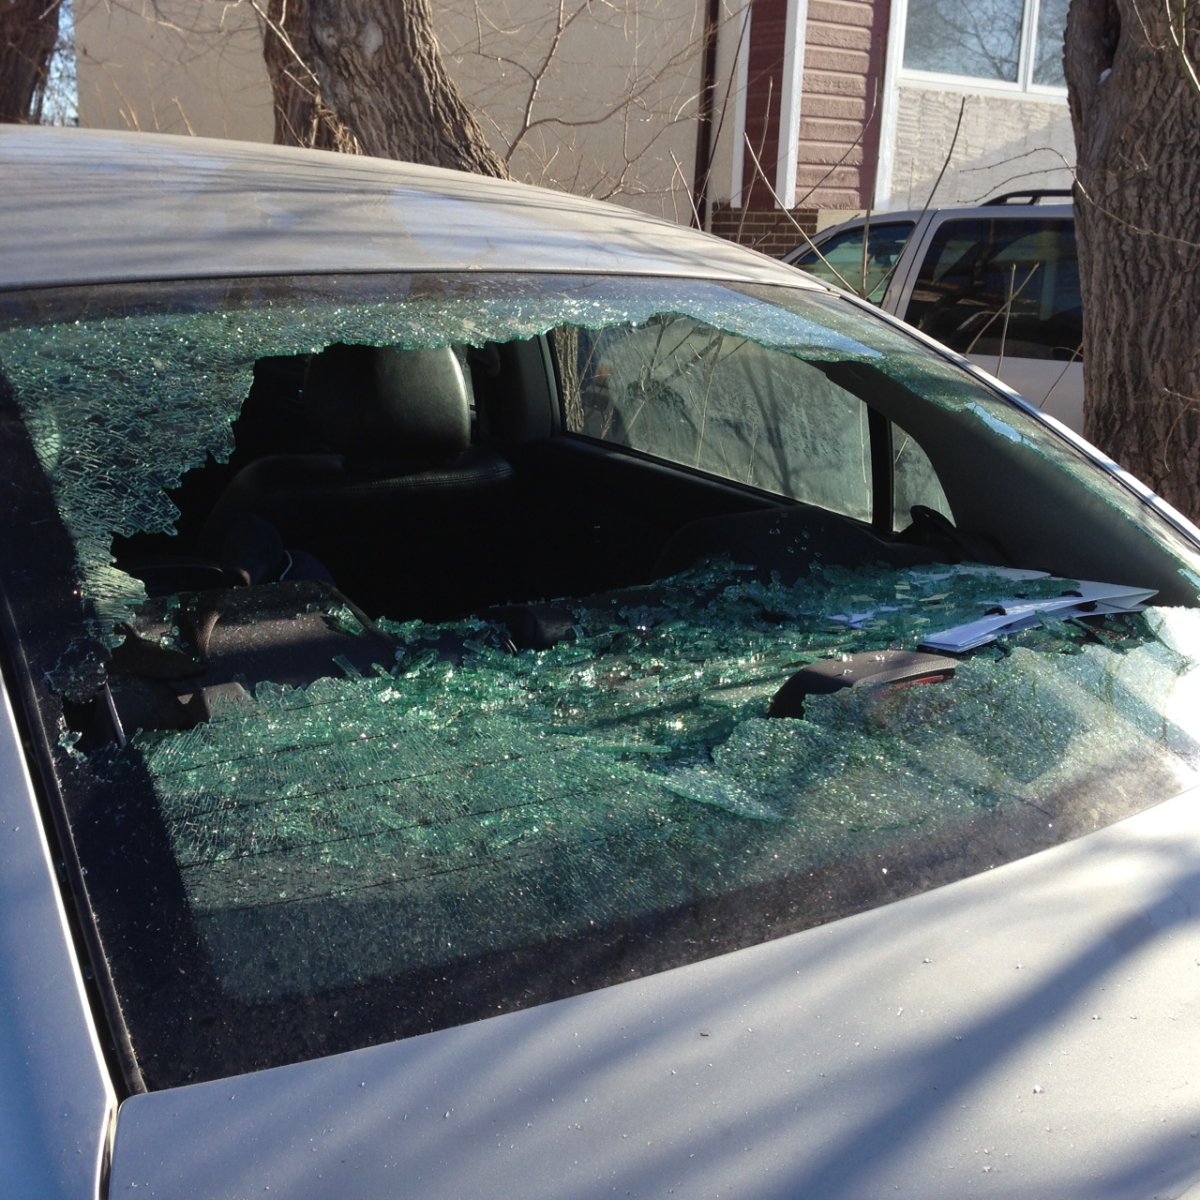 Police say scores of vehicles have been broken into in Richmond over the last month.